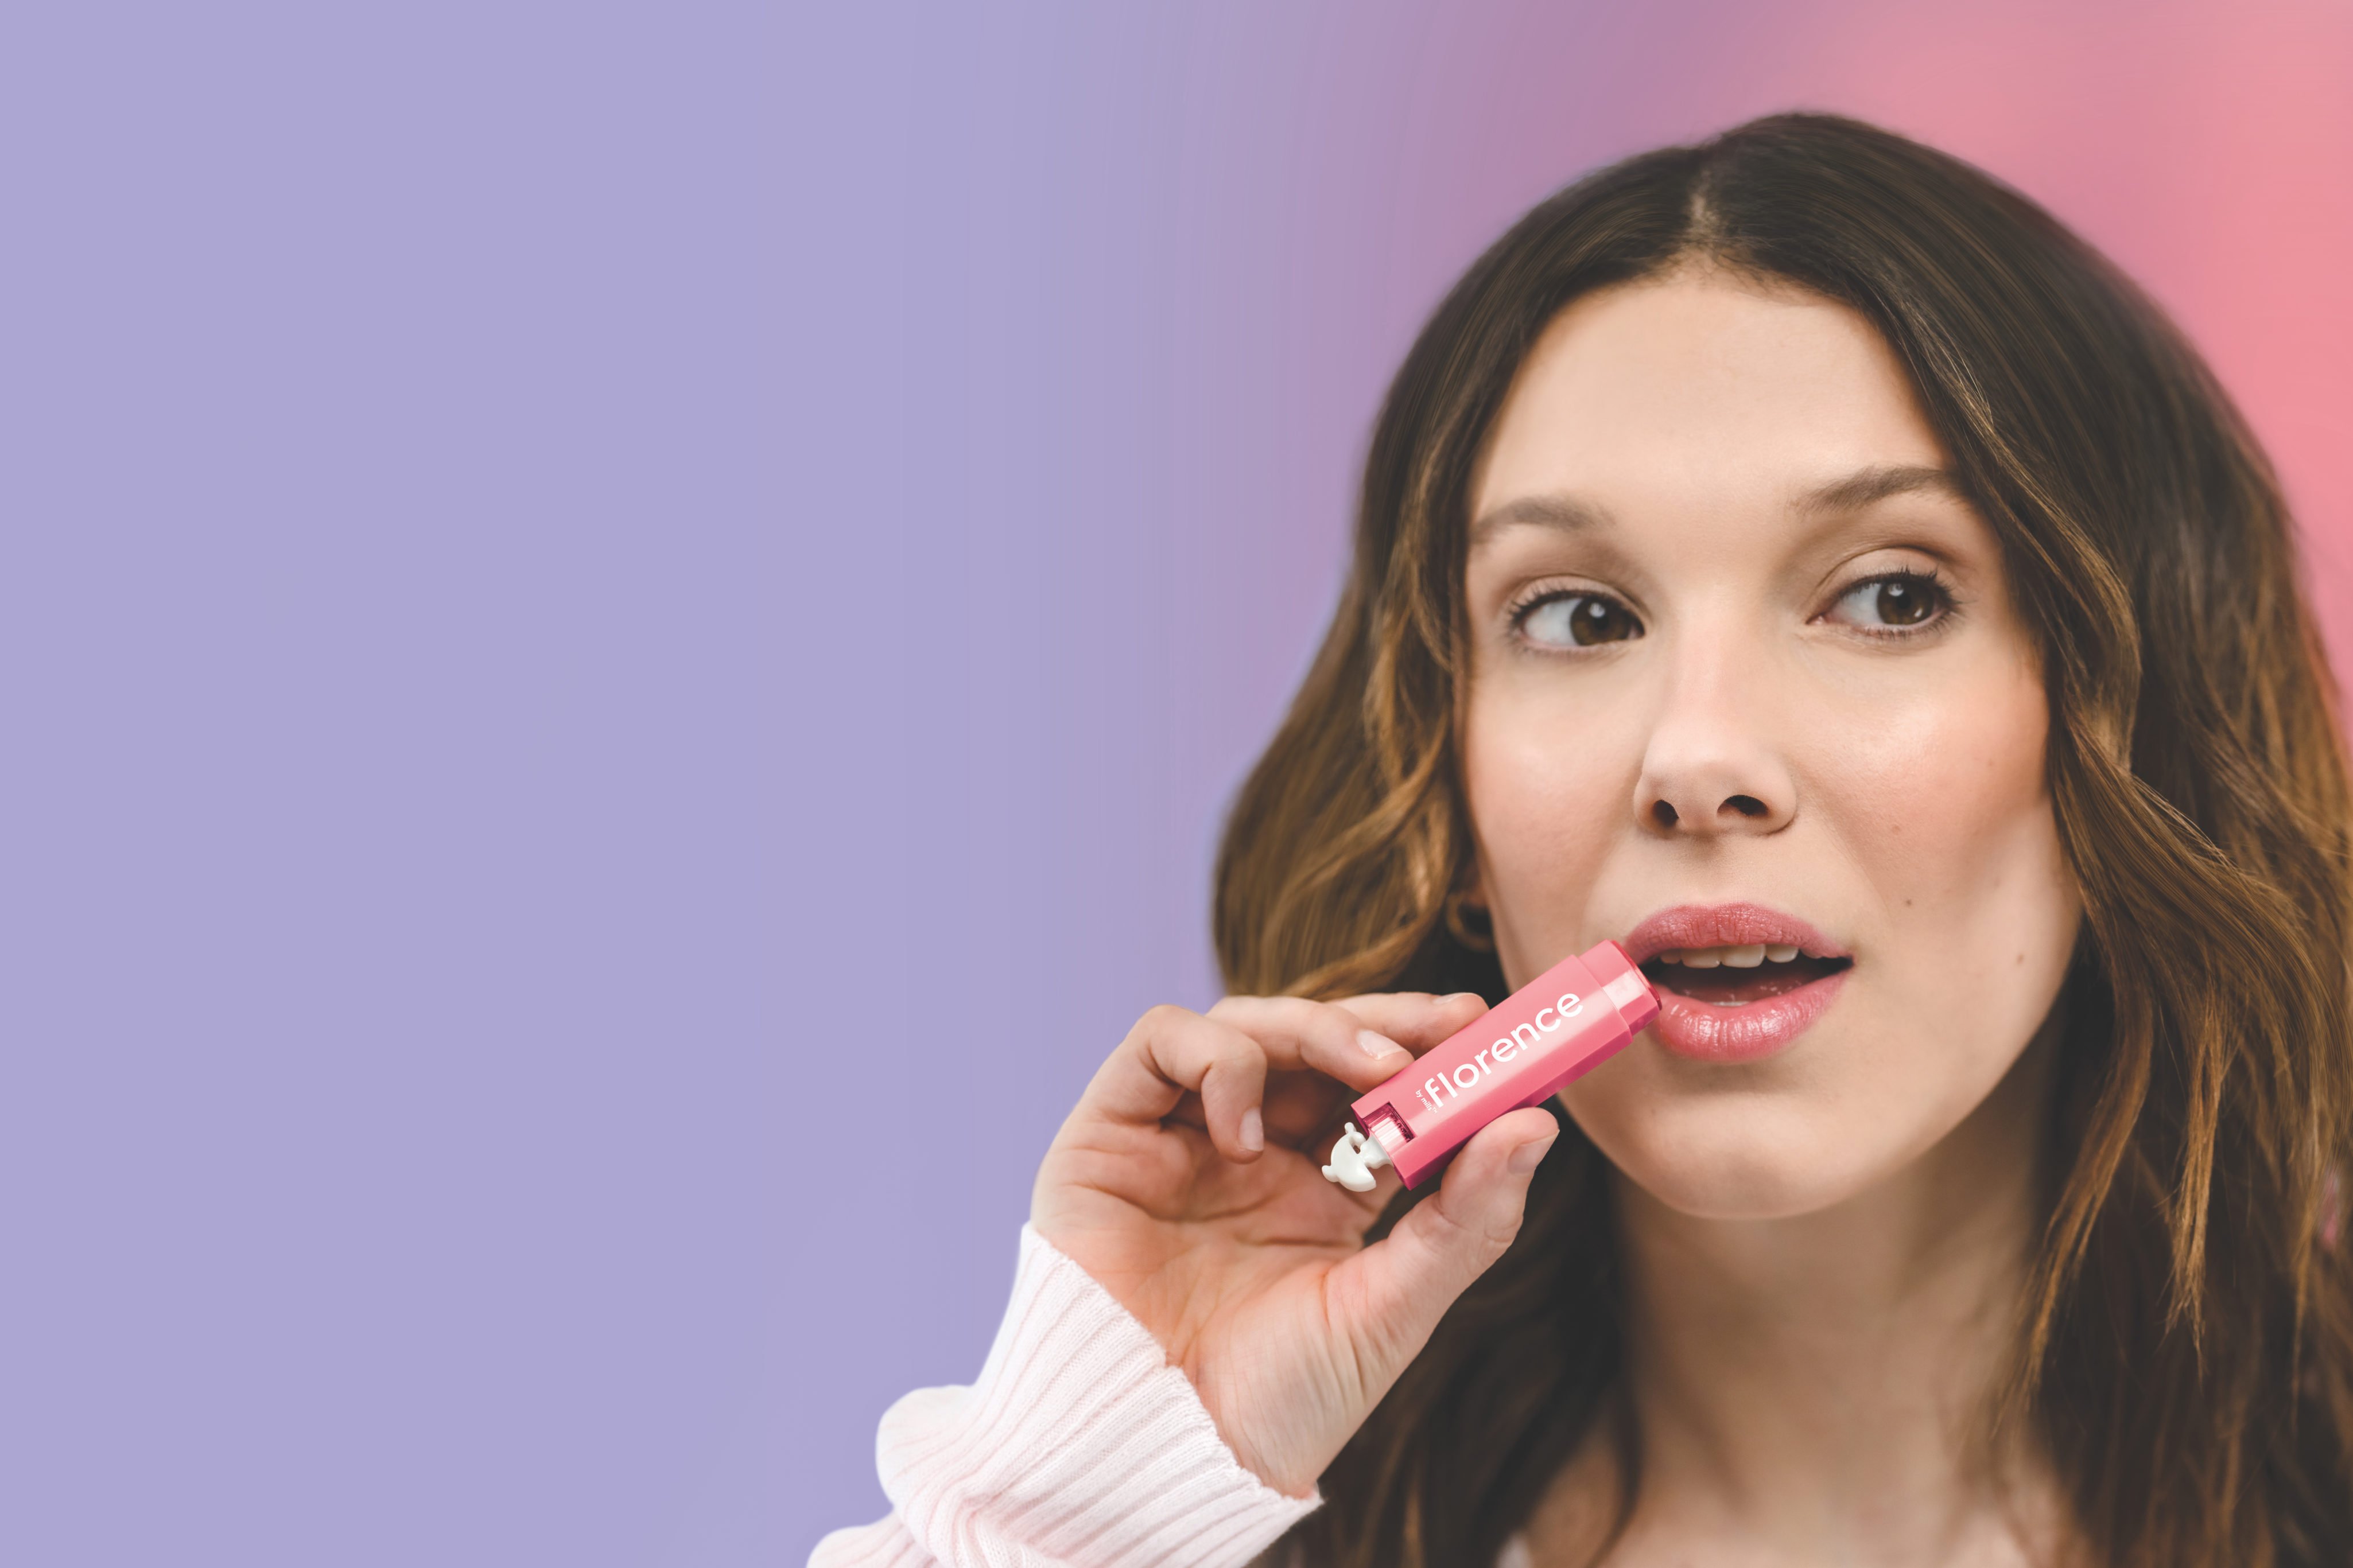 Millie Bobby Brown Launching Florence By Mills Beauty Brand